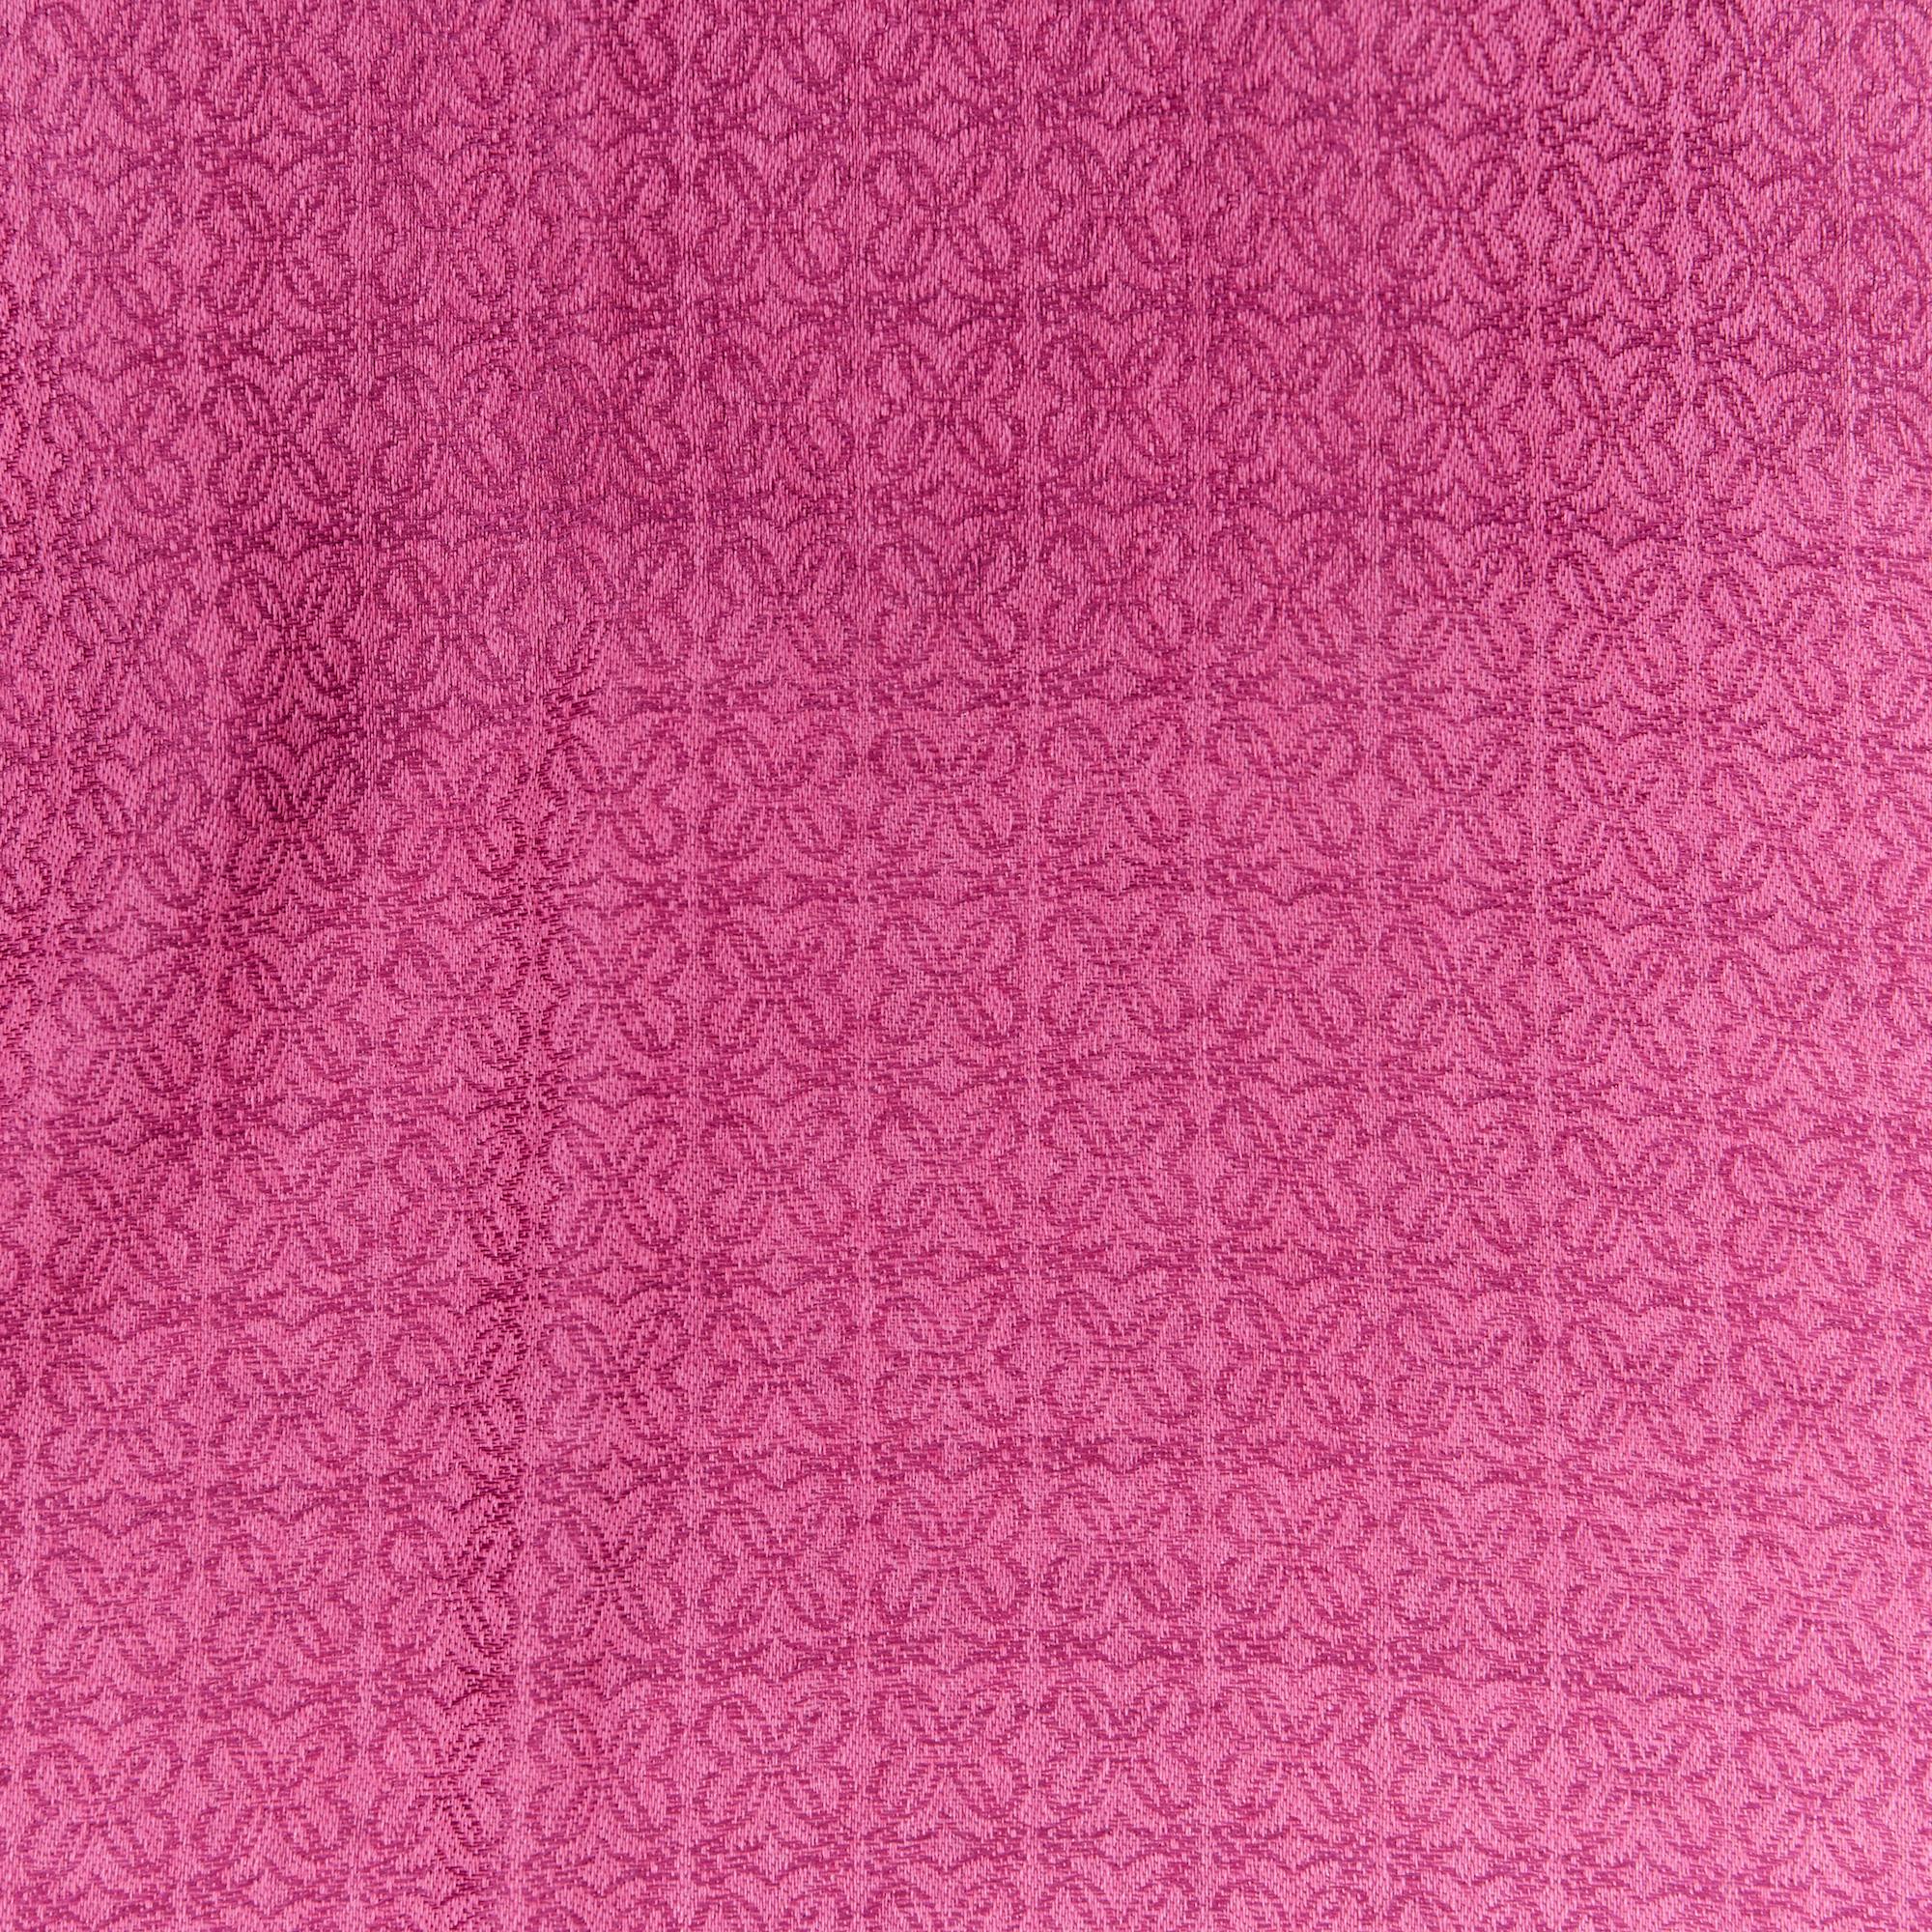 LOEWE wool silk cashmere blend Anagram monogram logo pattern frayed scarf 
Reference: LNKO/A01804 
Brand: Loewe 
Material: Wool 
Color: Pink 
Pattern: Abstract 
Extra Detail: Frayed edges. 
Made in: Italy 

CONDITION: 
Condition: Excellent, this